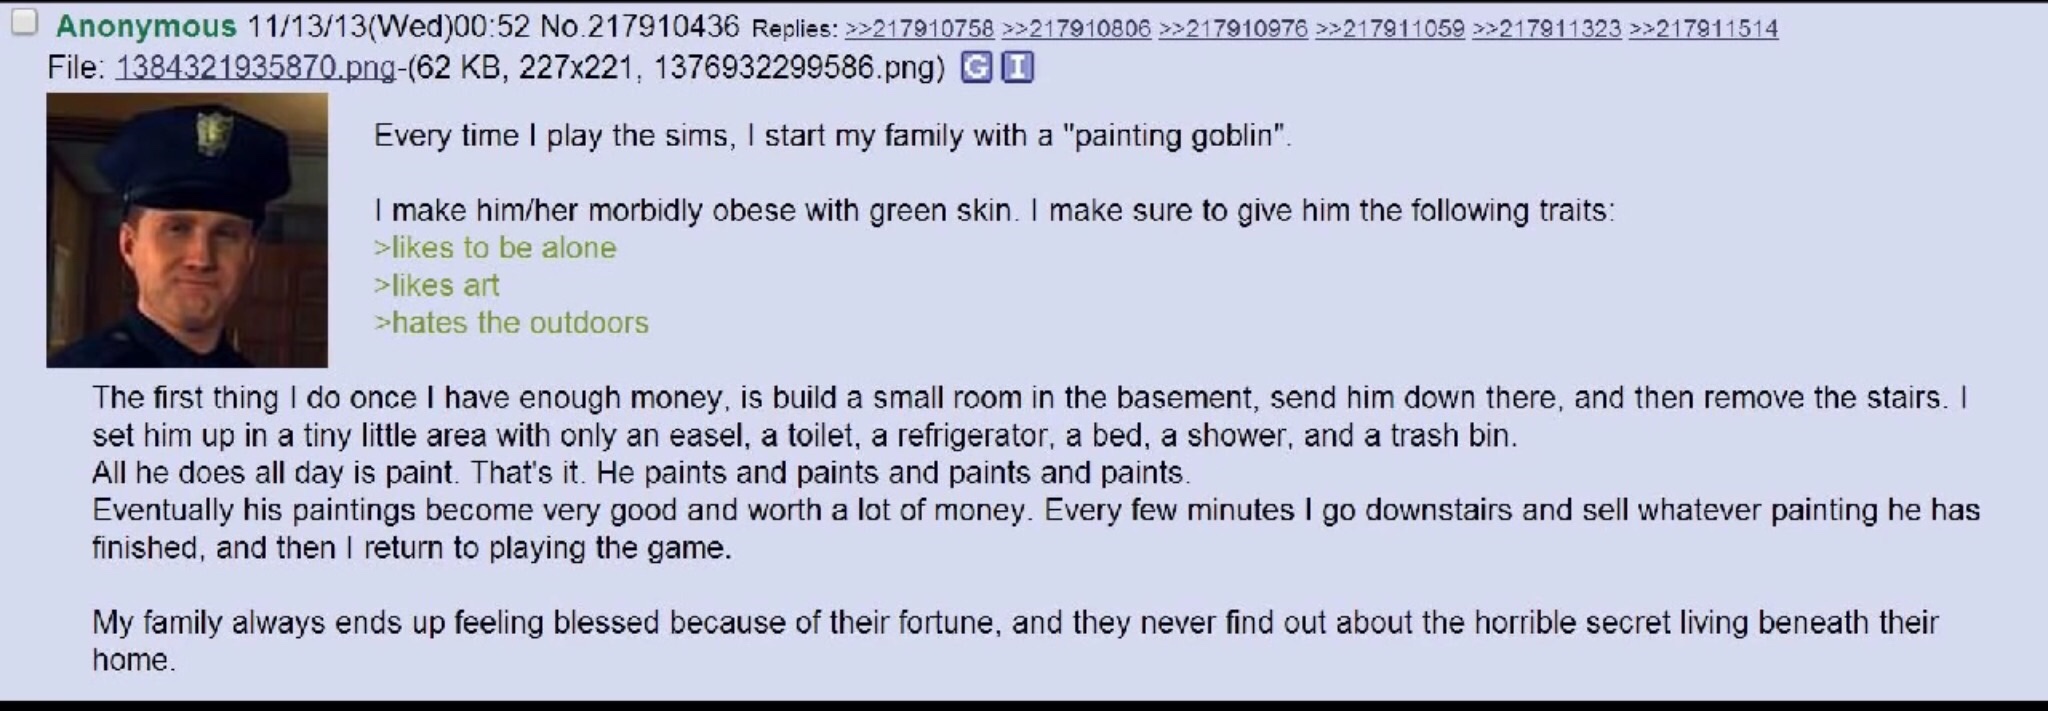 tales from 4chan - meme